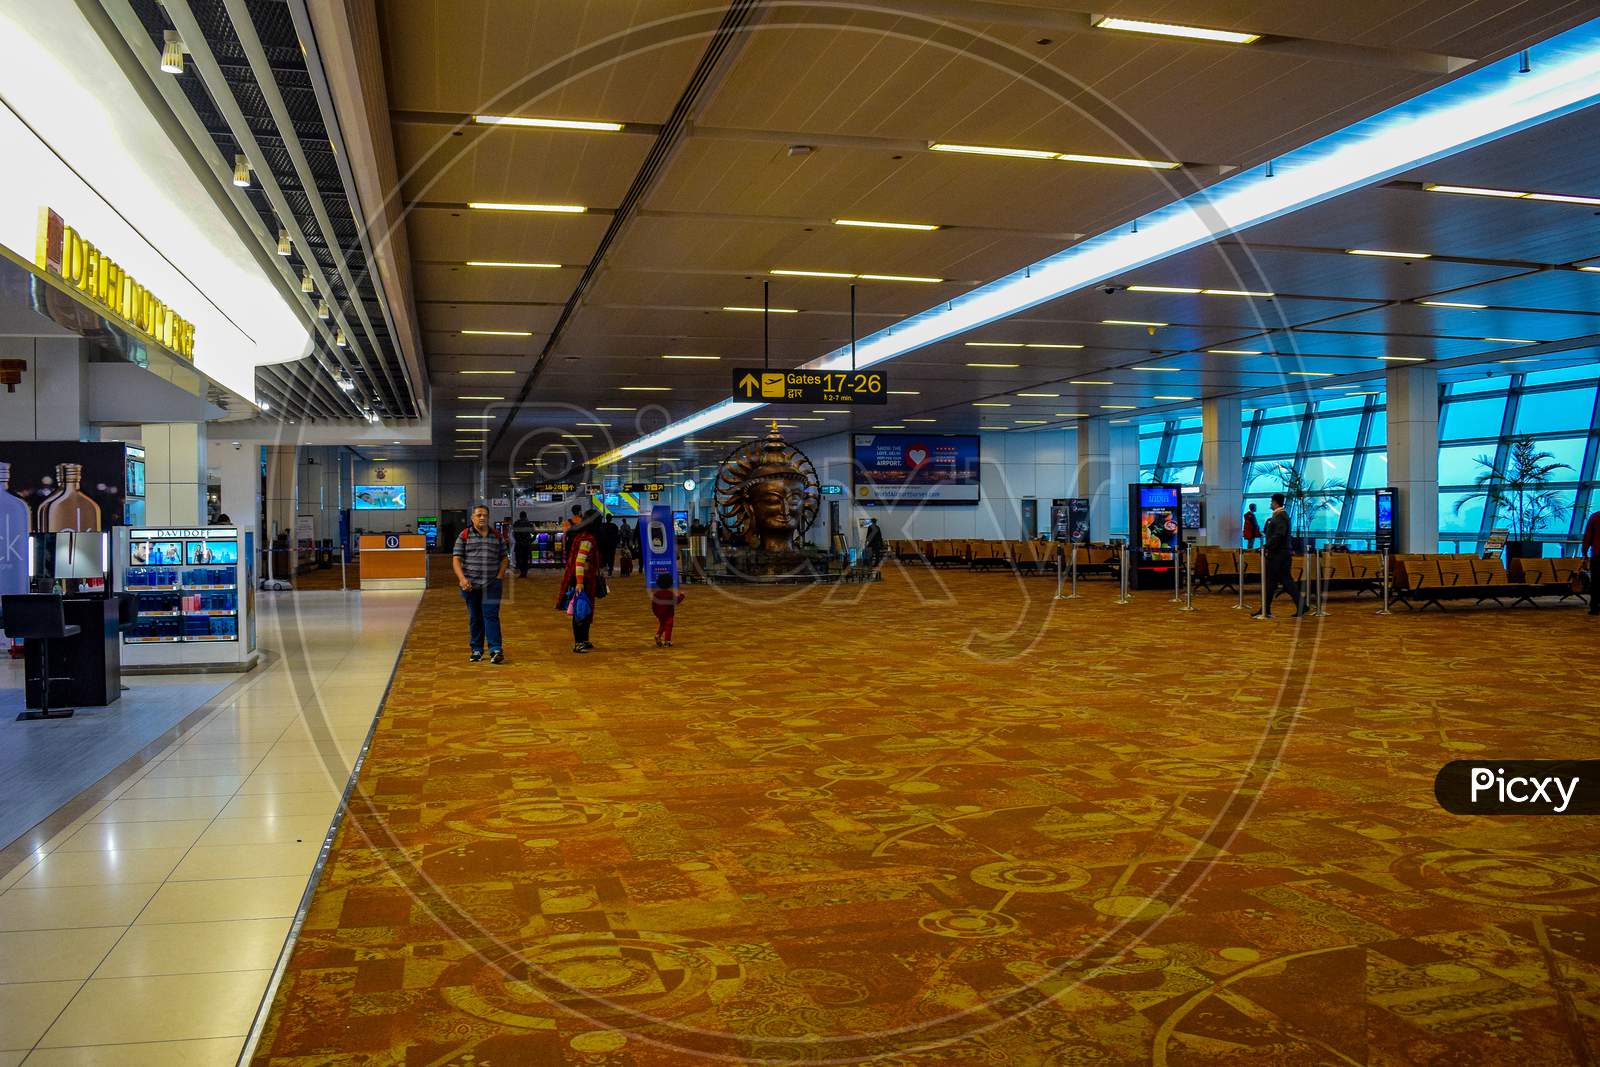 Singapore - Circa August, 2016: Inside Of Singapore Changi Airport. Singapore Changi Airport Is The Primary Civilian Airport For Singapore, And One Of The Largest Transportation Hubs In Southeast Asia